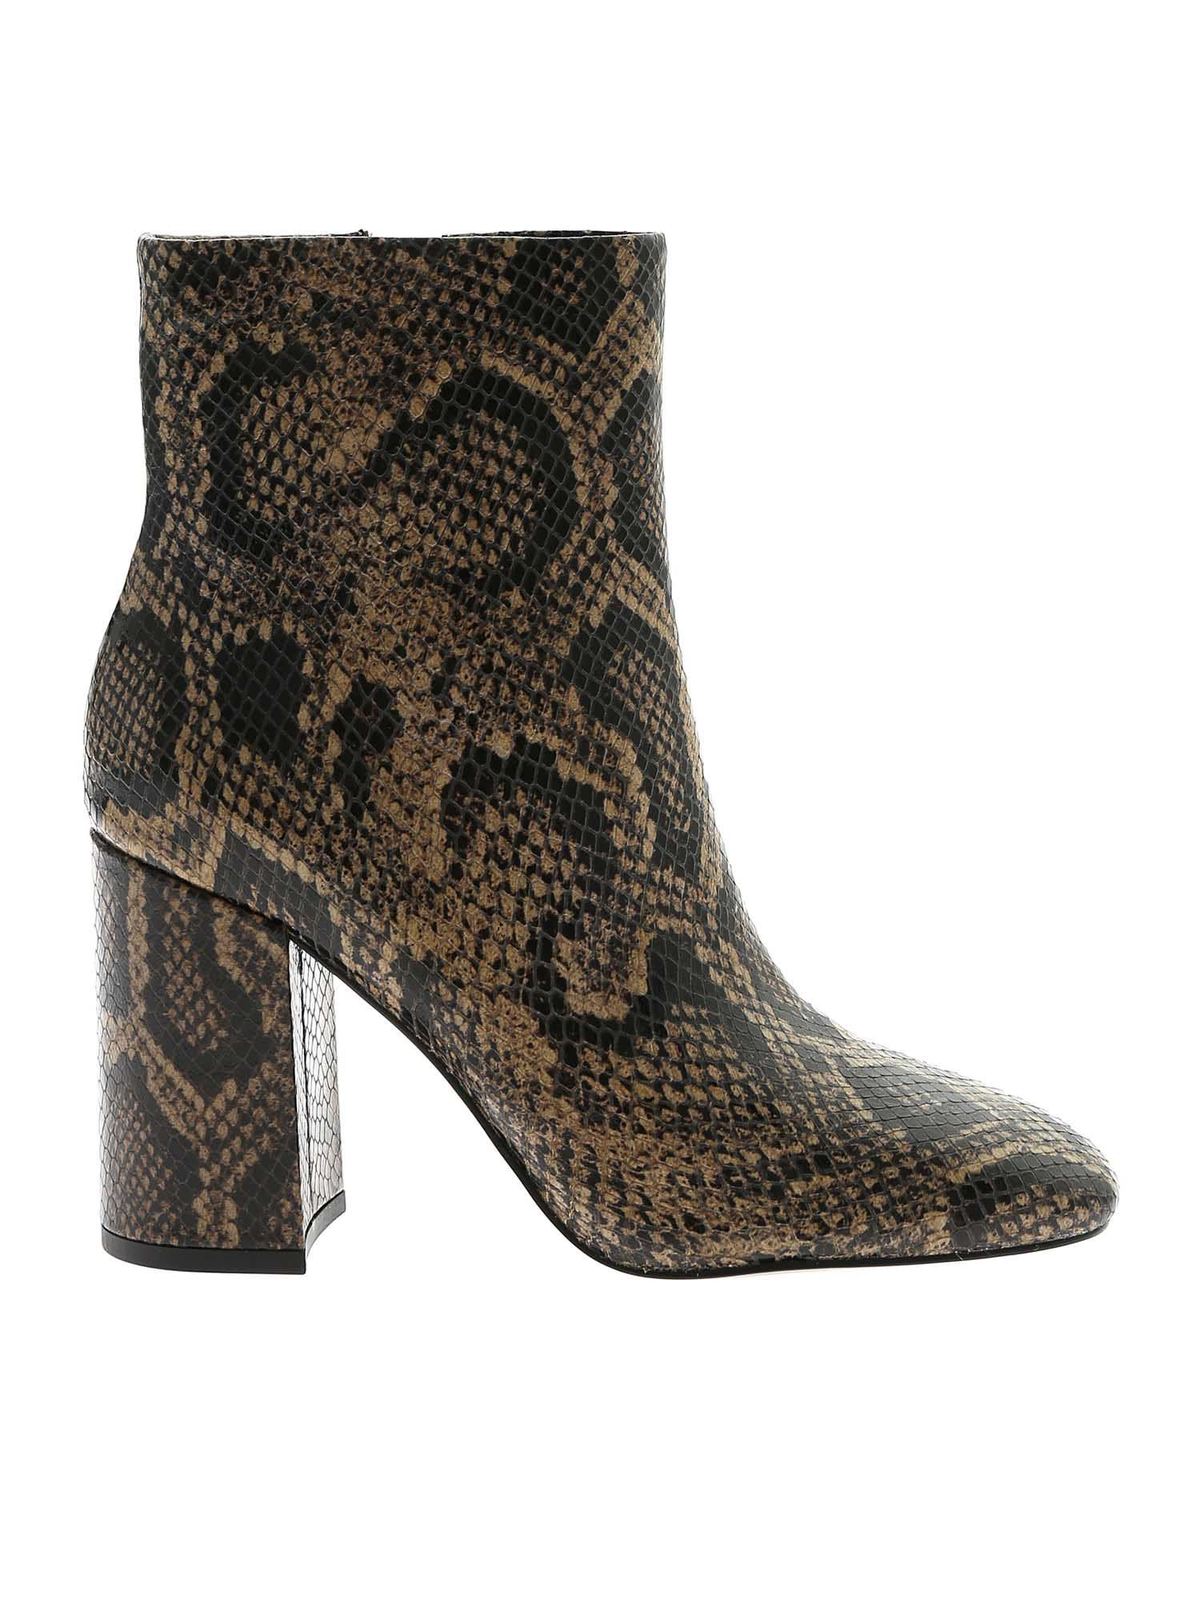 ASH JADE ANKLE BOOTS REPTILE EFFECT